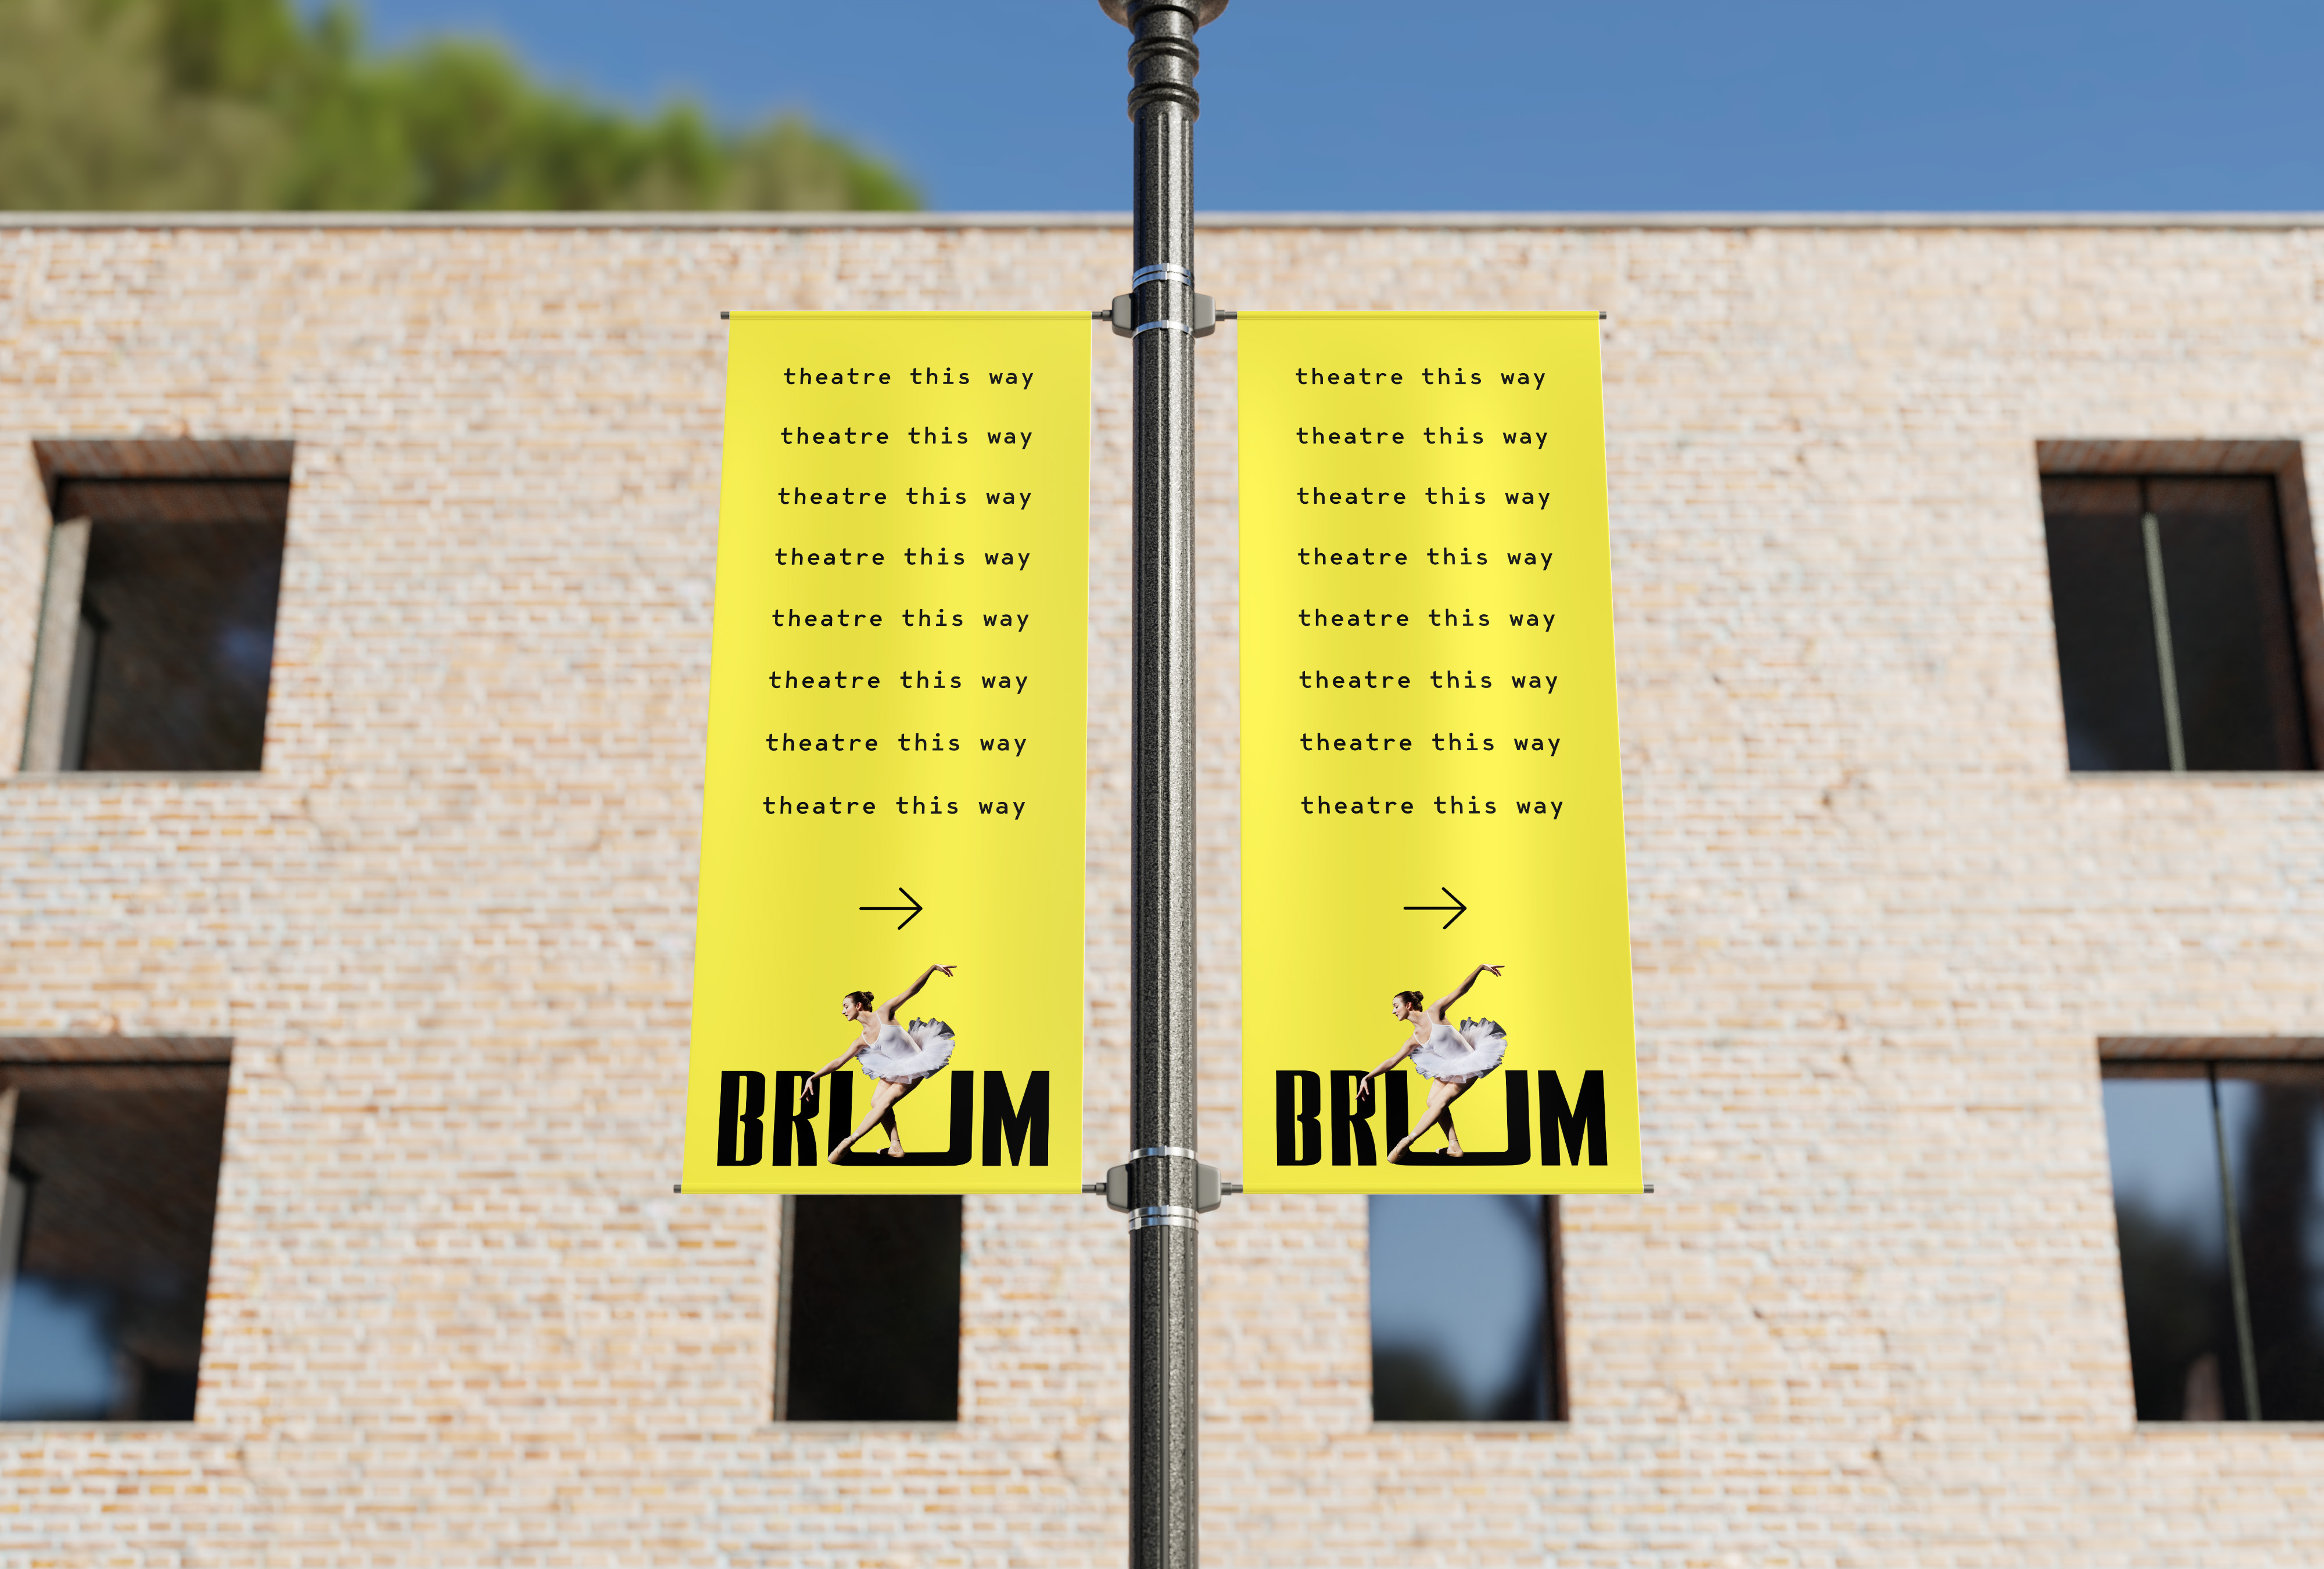 Birmingham way-finding by Thea Reeder. The banner shows a bold yellow background with repeating text "theatre this way". An image of a ballerina is present, fitting into the logo.